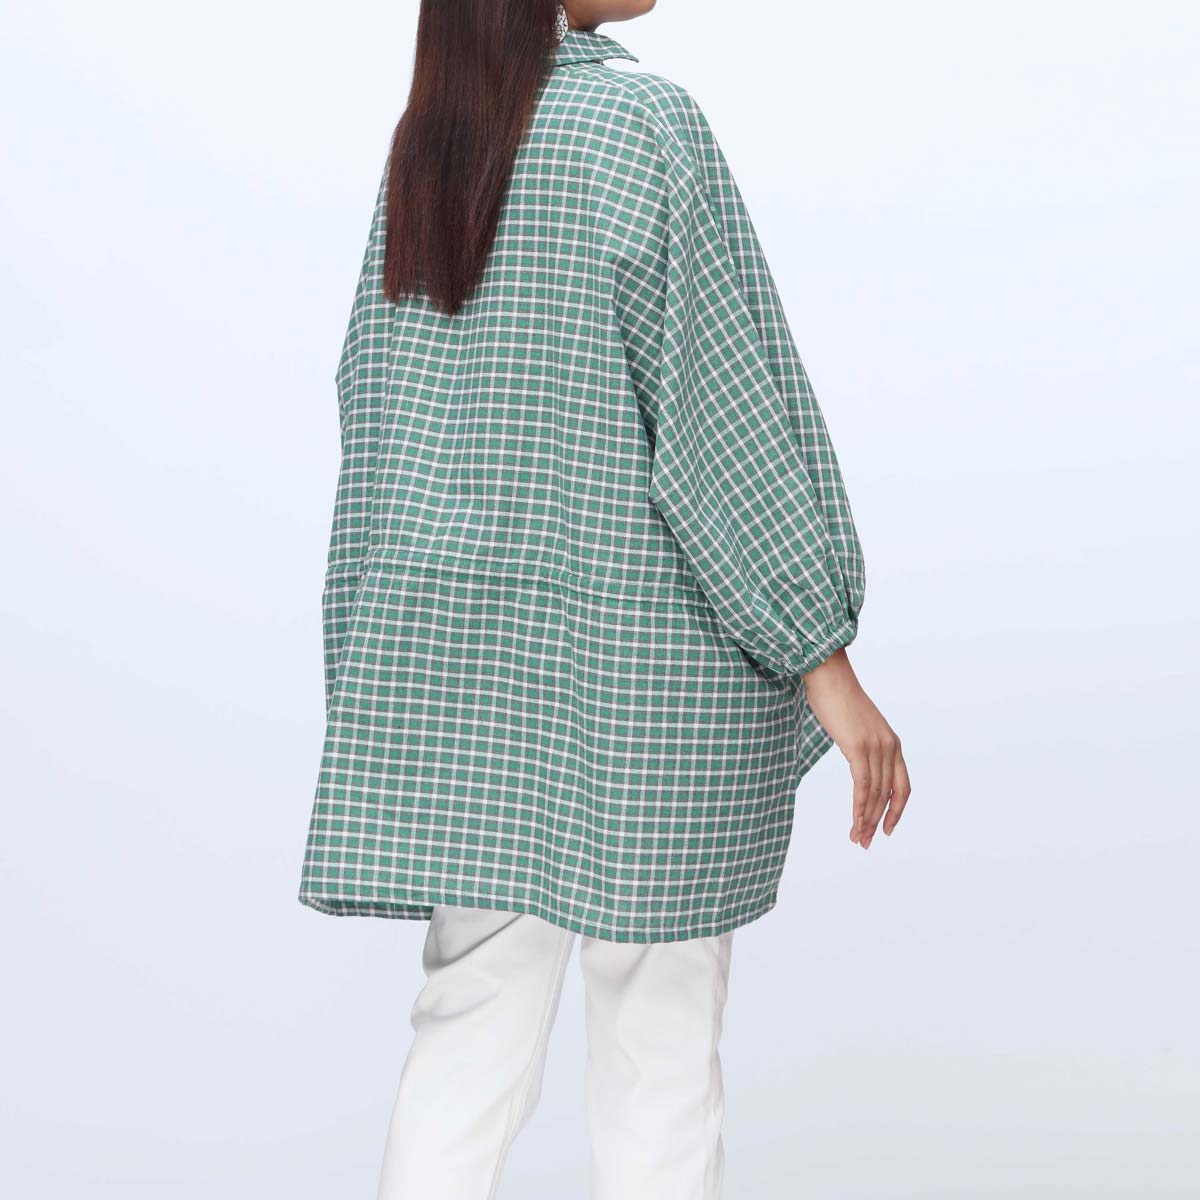 1PC-Flannel Checkered Top PW3088